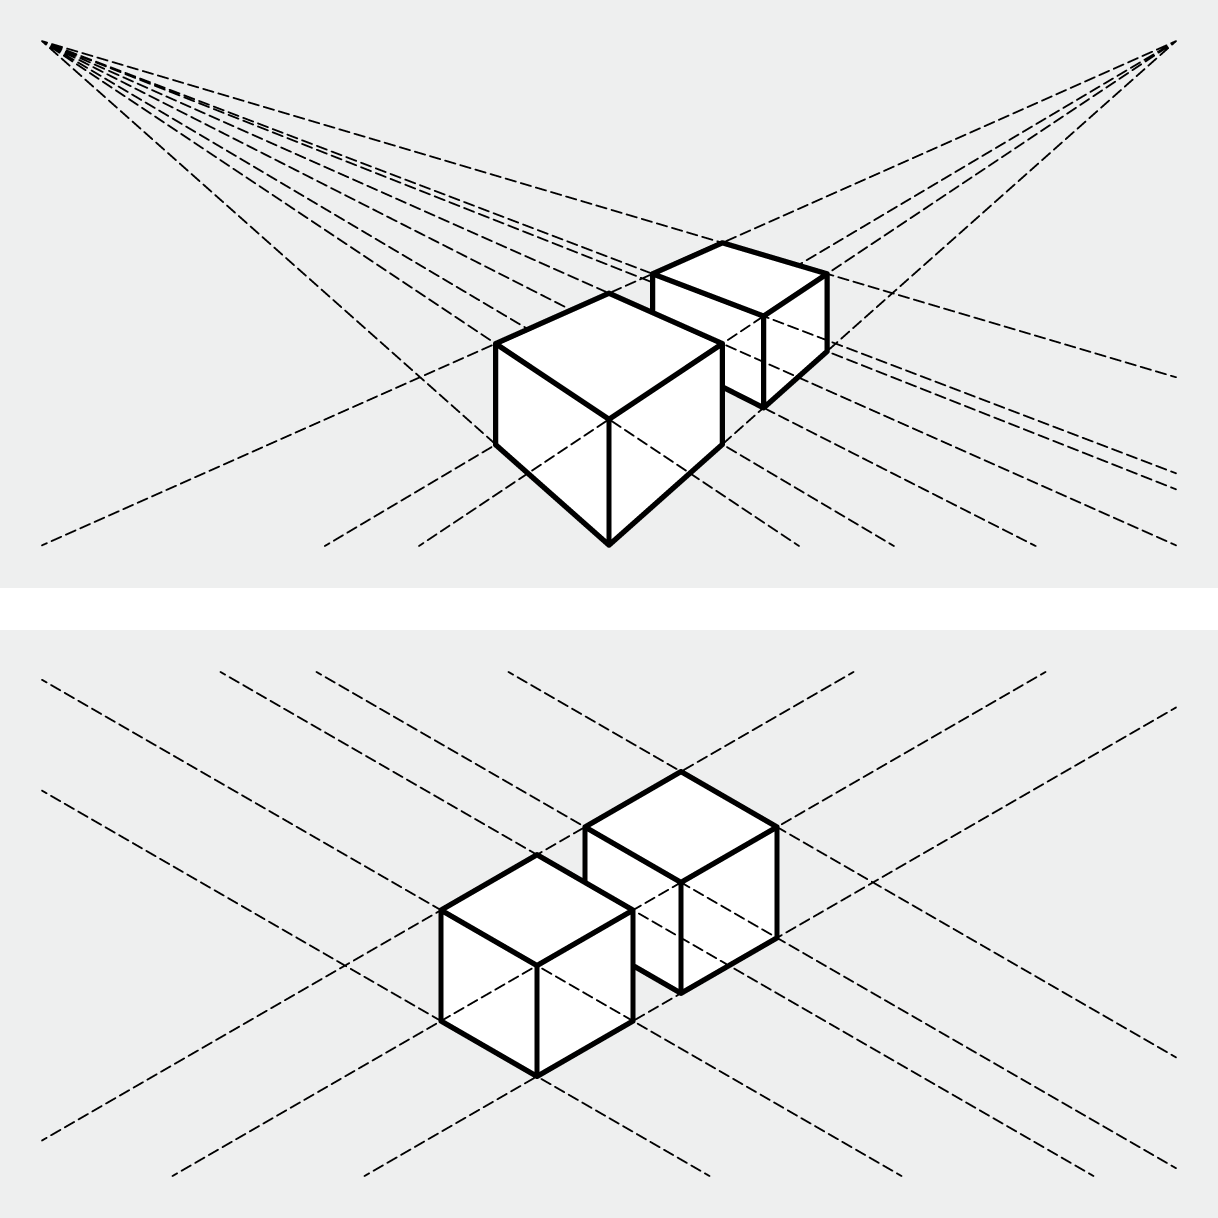 Two renderings of a pair of cubes, with dashed lines showing the path of their parallel lines. In the first rendering, the lines all originate from one of two points on the horizon and spread outward from there. In the second rendering, the lines all have different origins and different destinations.